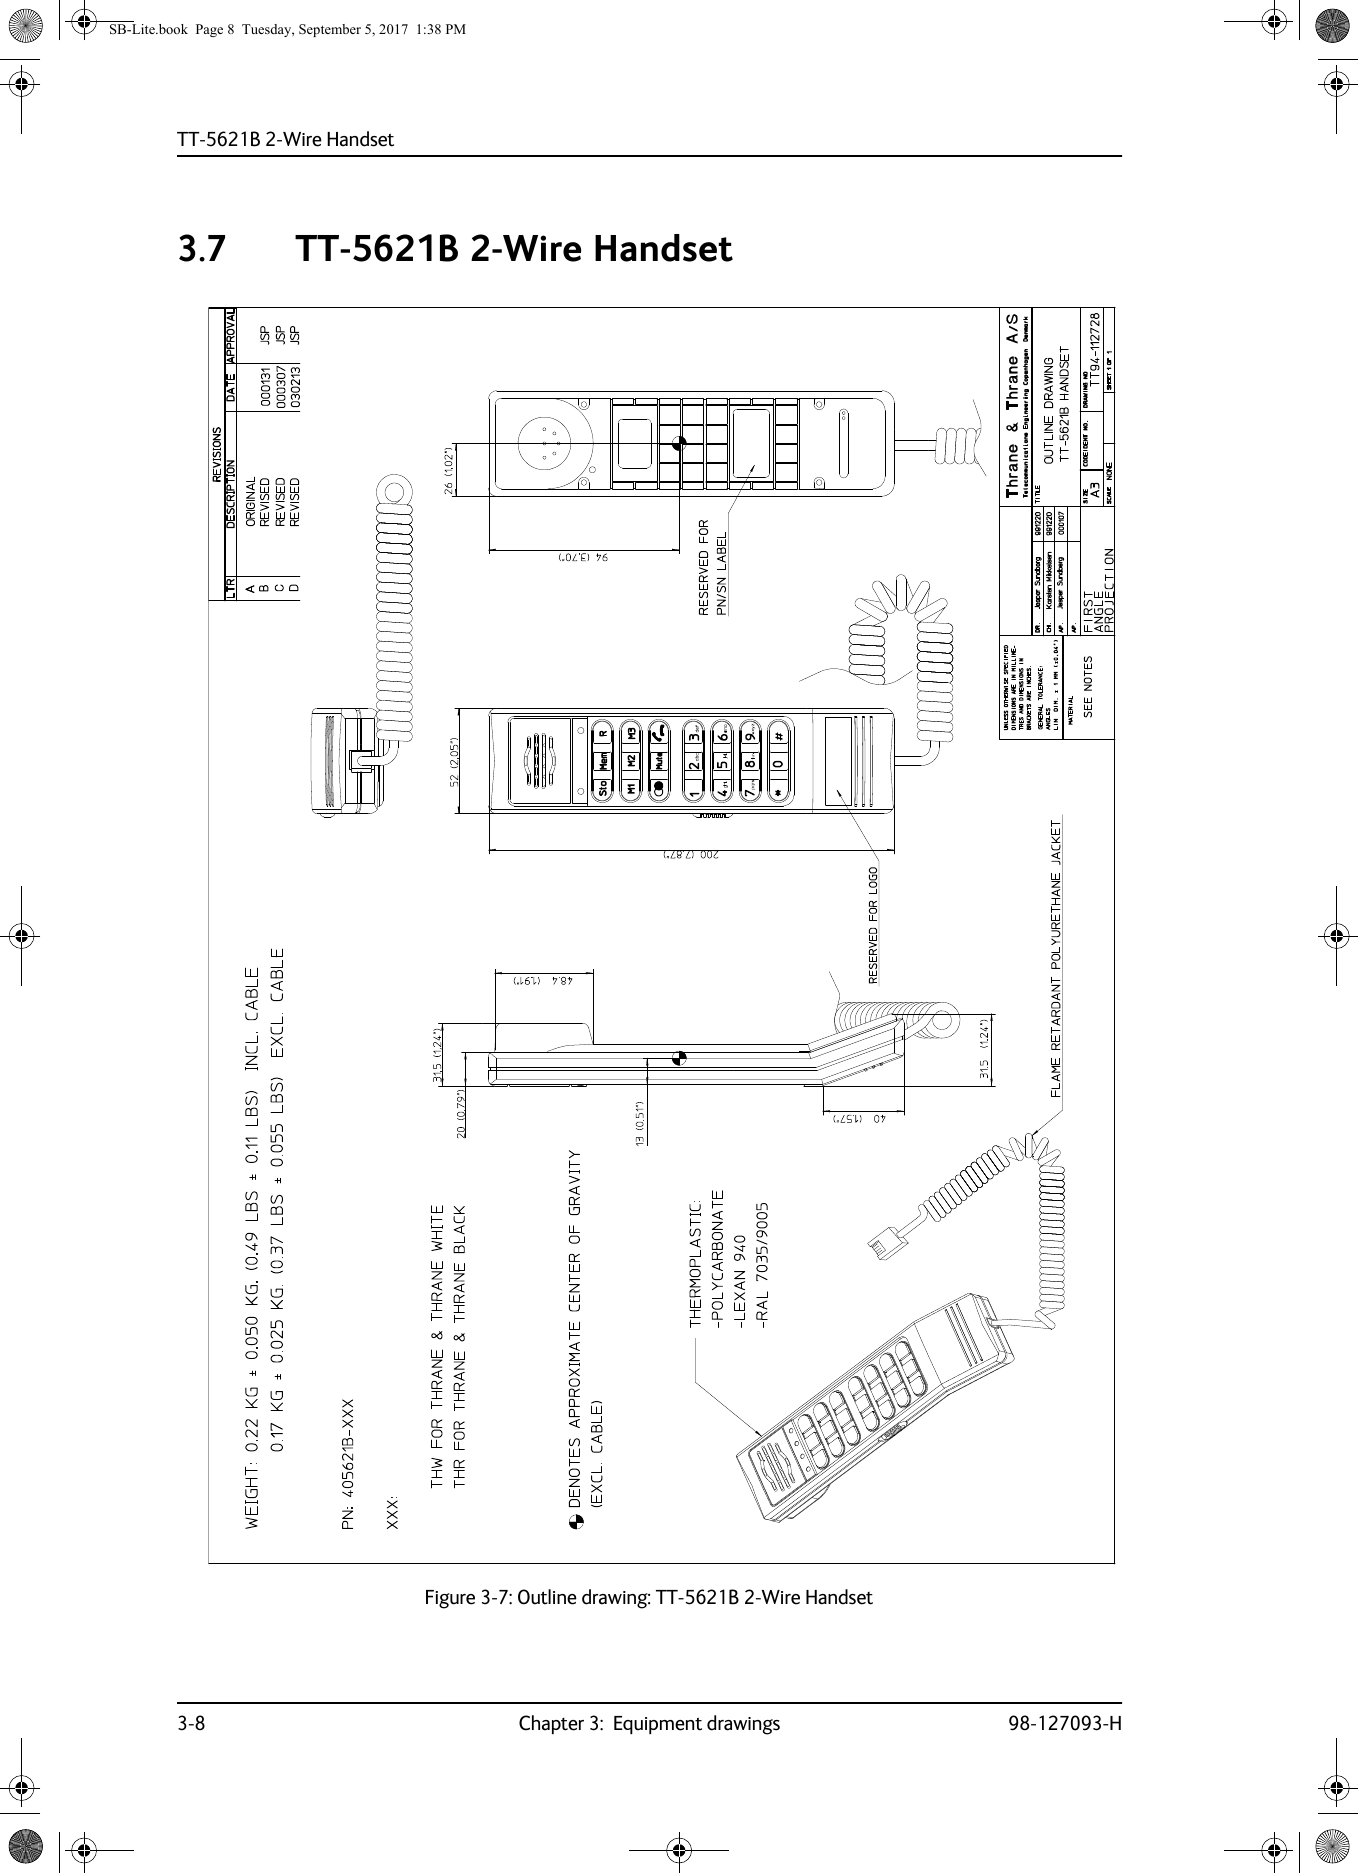 TT-5621B 2-Wire Handset3-8 Chapter 3:  Equipment drawings 98-127093-H3.7 TT-5621B 2-Wire HandsetFigure 3-7:  Outline drawing: TT-5621B 2-Wire HandsetSB-Lite.book  Page 8  Tuesday, September 5, 2017  1:38 PM